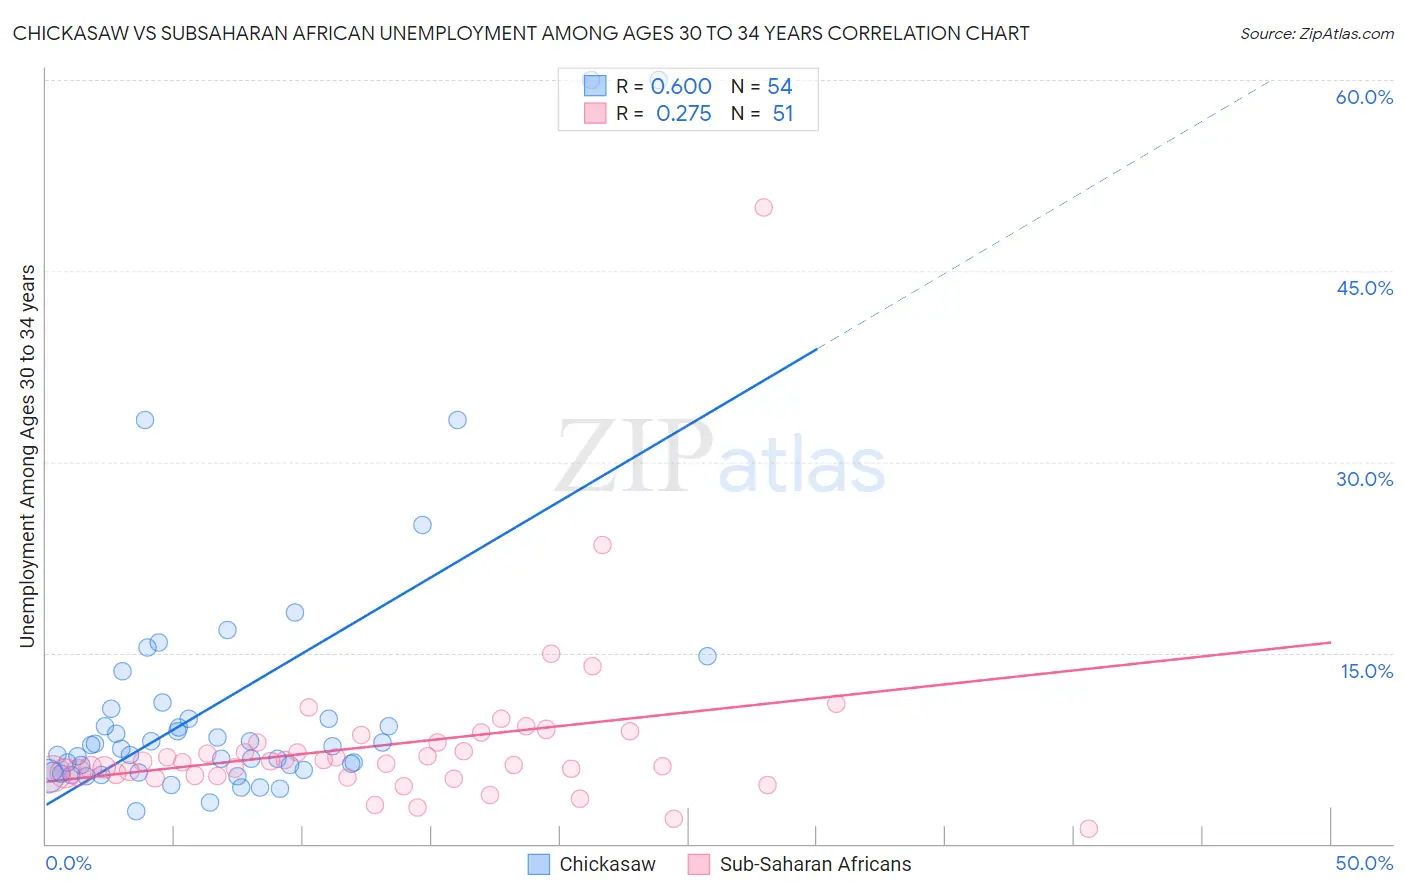 Chickasaw vs Subsaharan African Unemployment Among Ages 30 to 34 years